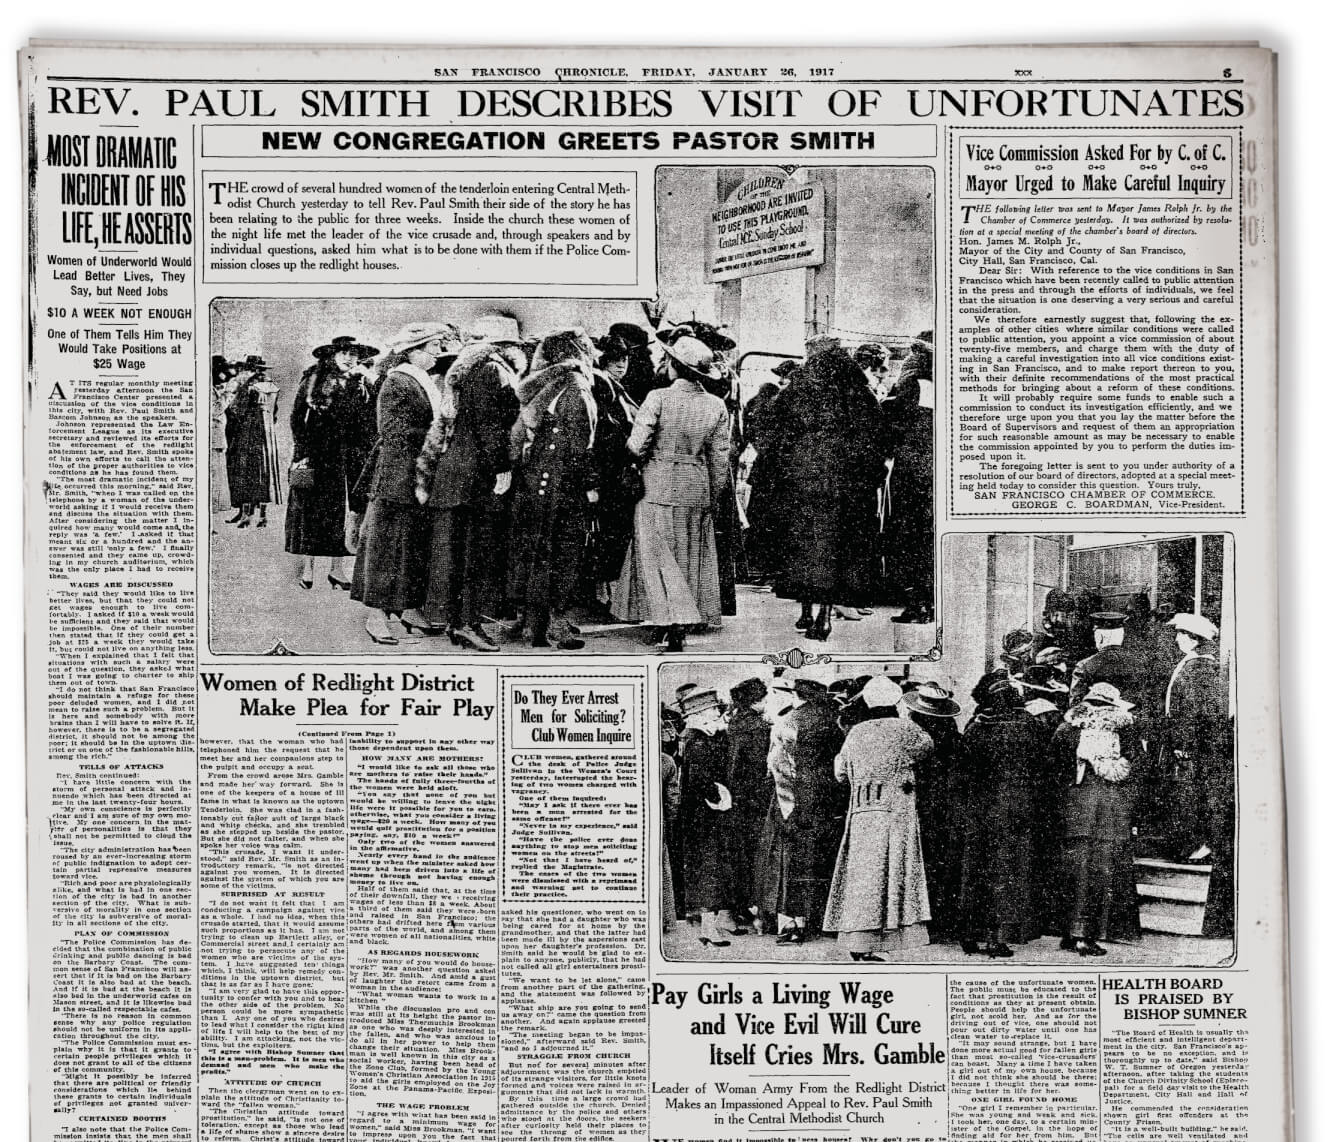 Reproduction of a 1917 newspaper page. The headlines read: PAY GIRLS A LIVING WAGE AND VICE EVIL WILL CURE ITSELF CRIES MRS. GAMBLE, DO THEY EVER ARREST MEN FOR SOLICITING? CLUB WOMEN INQUIRE; WOMEN OF RED LIGHT DISTRICT MAKE PLEA FOR FAIR PLAY